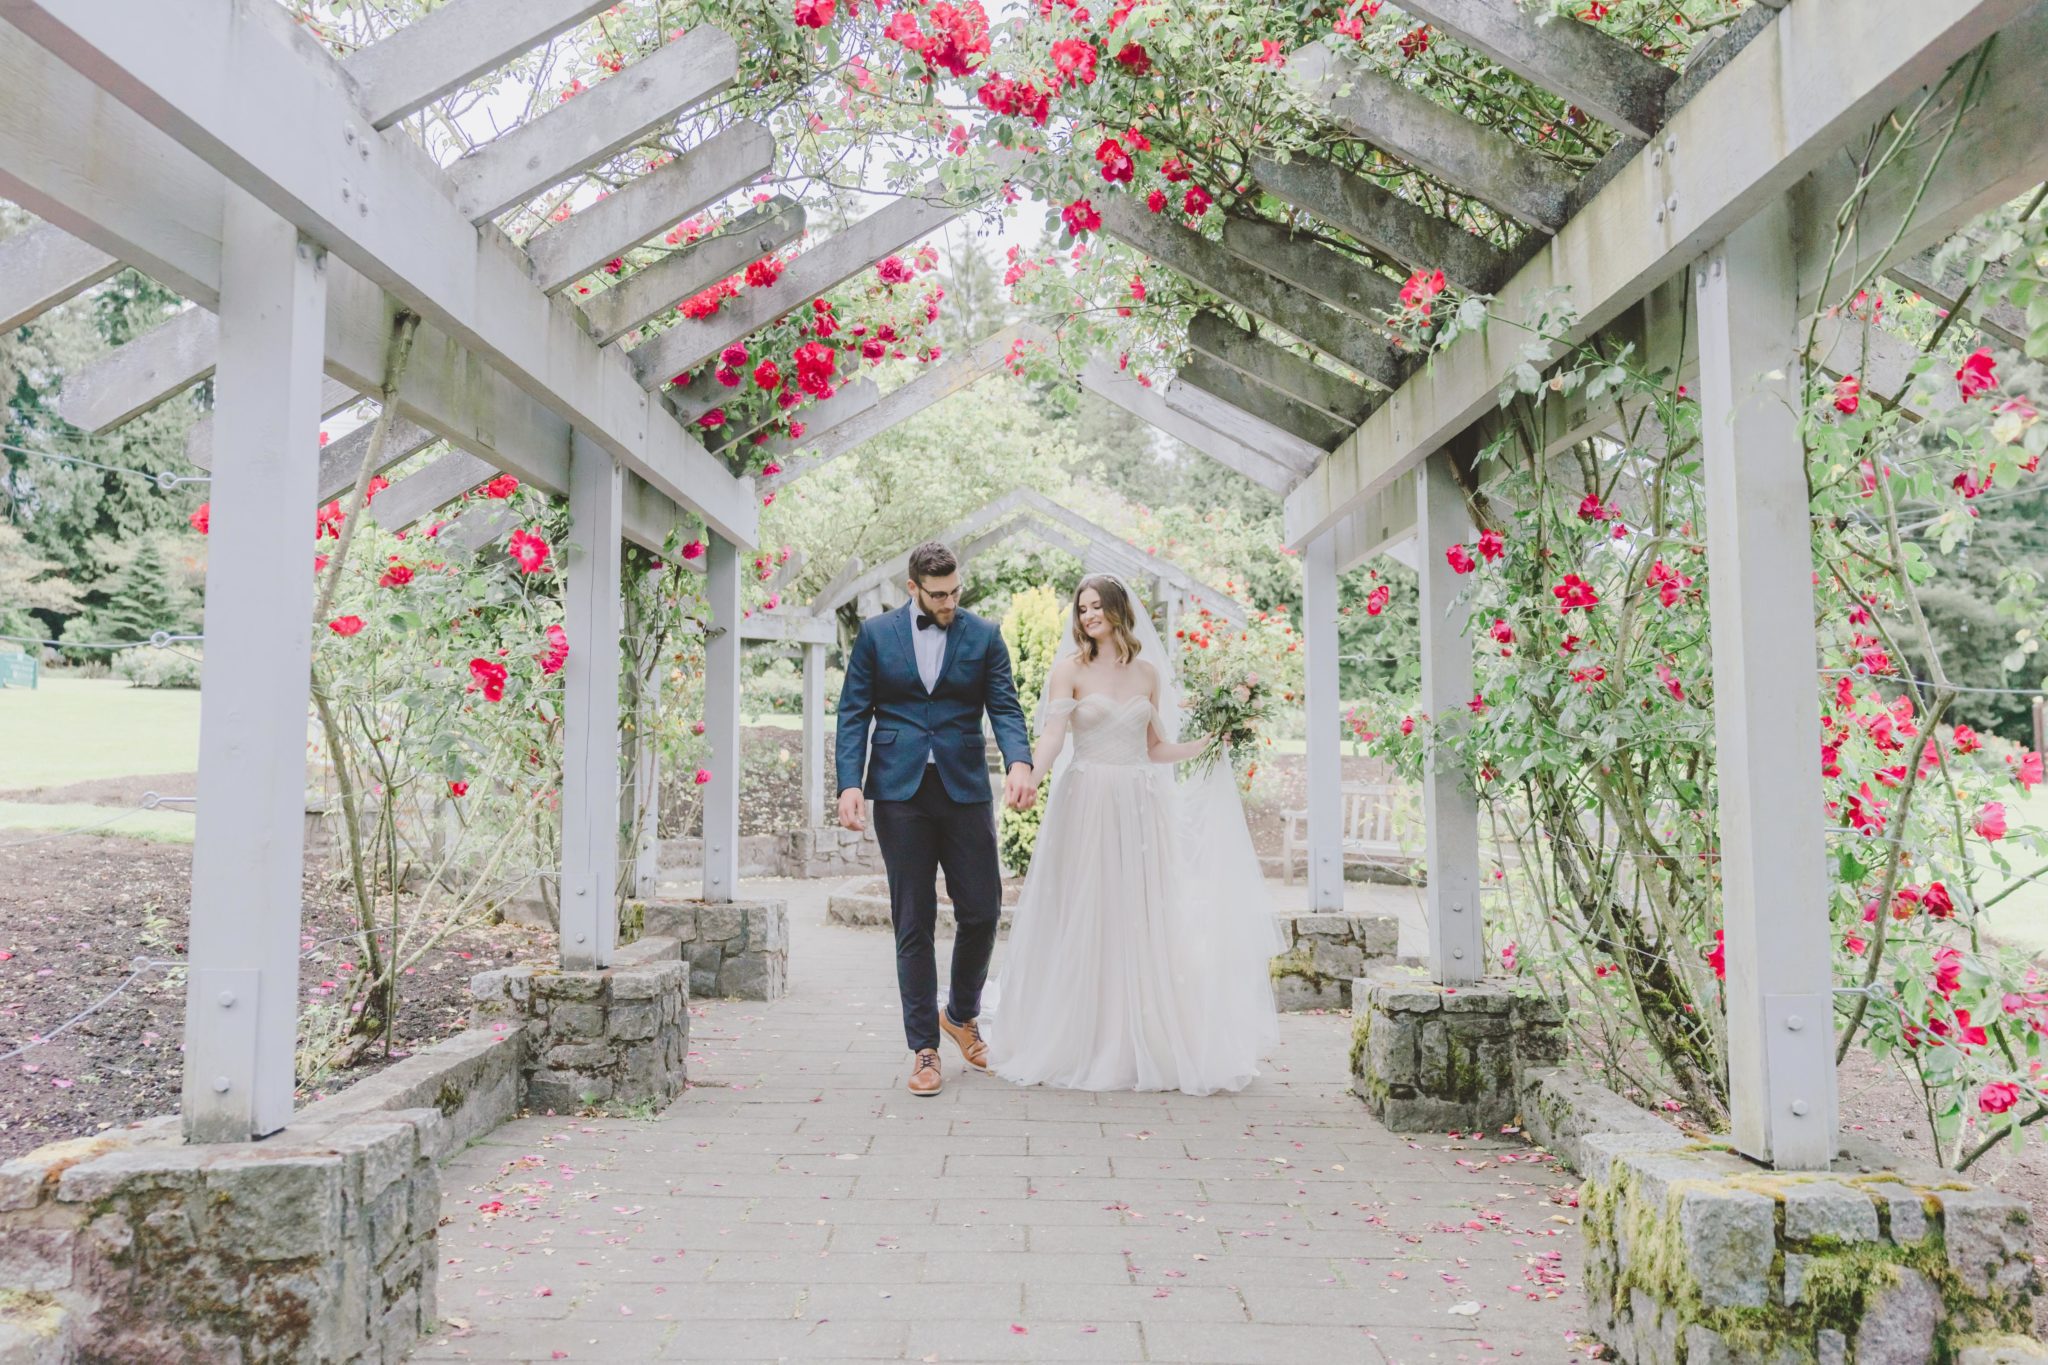 Enchanting rose garden wedding with romantic Taylor Swift inspired wedding gown